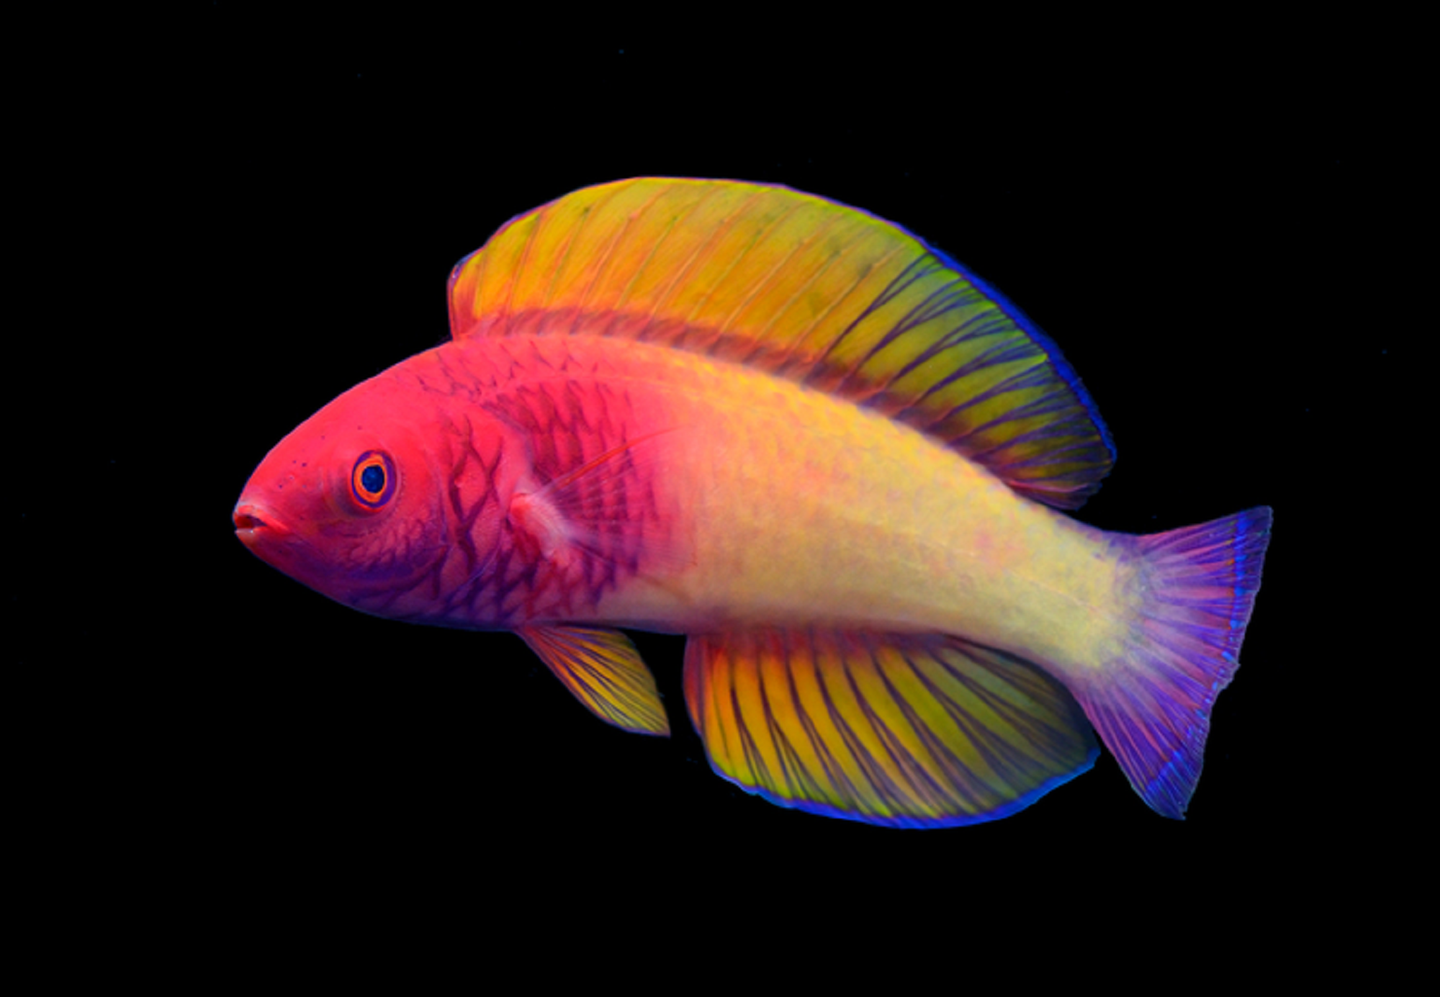 Small brilliant colored reef fish with a pink face, yellow fins, and purple tail on a black background